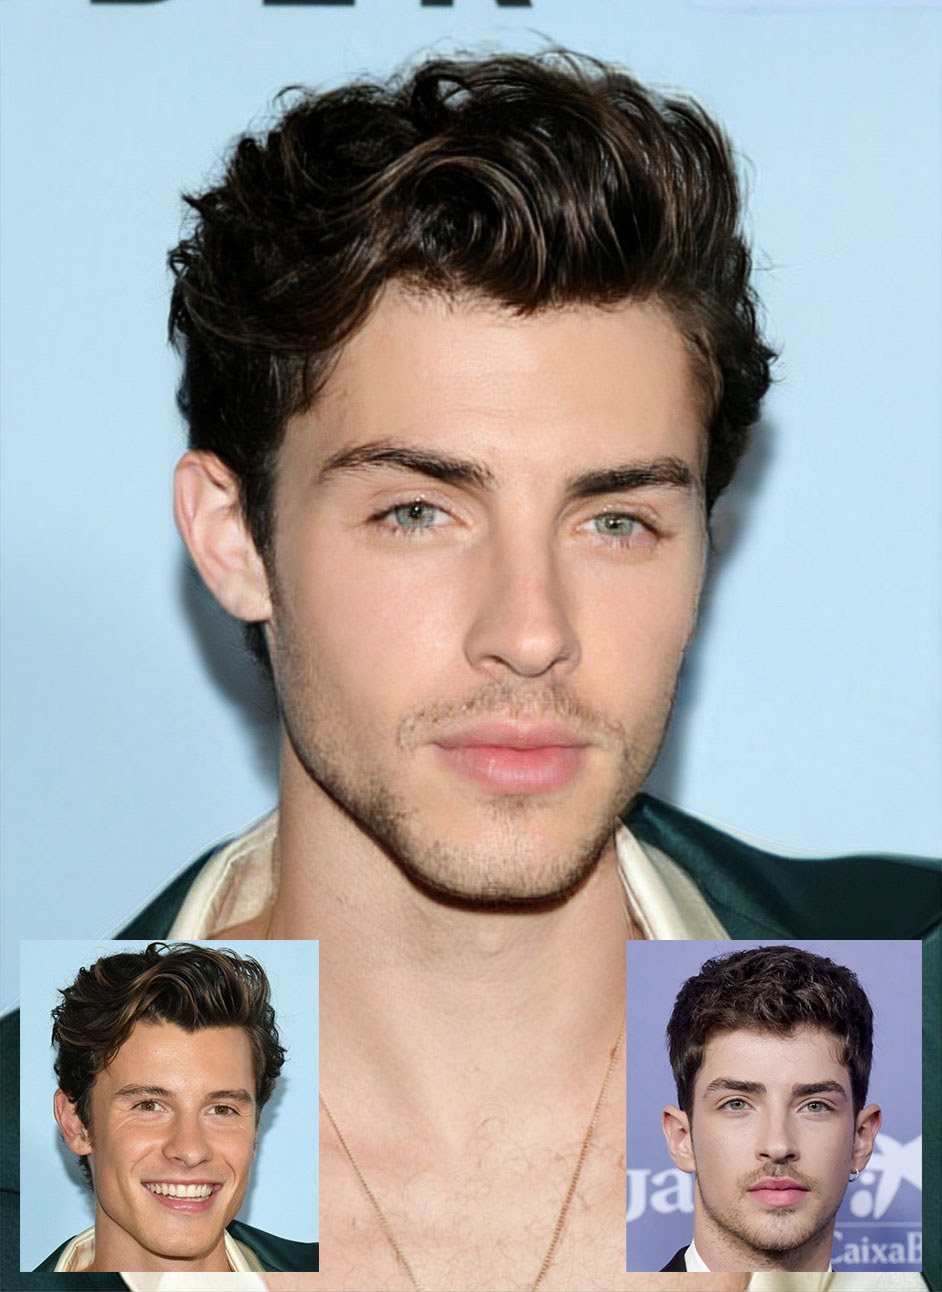 Shawn and Manu morphed together